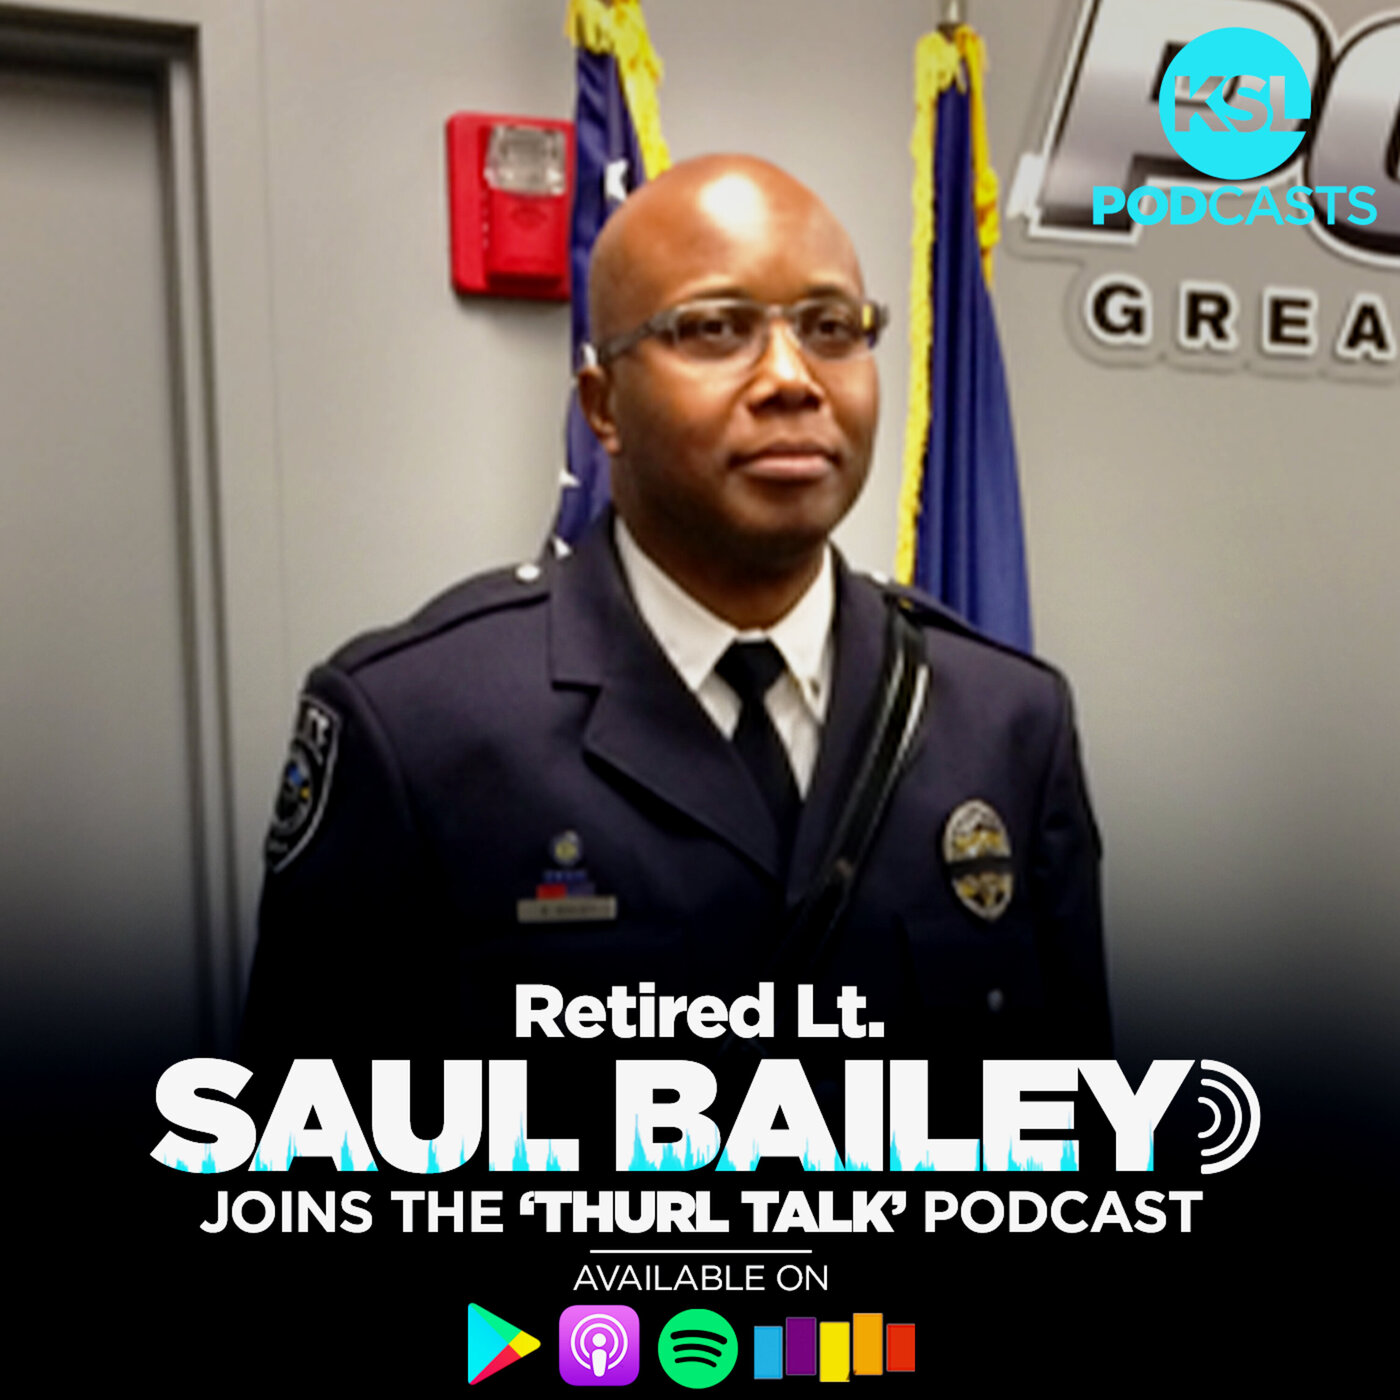 Saul Bailey on discrimination, community-oriented policing, and why trust is so important as an officer